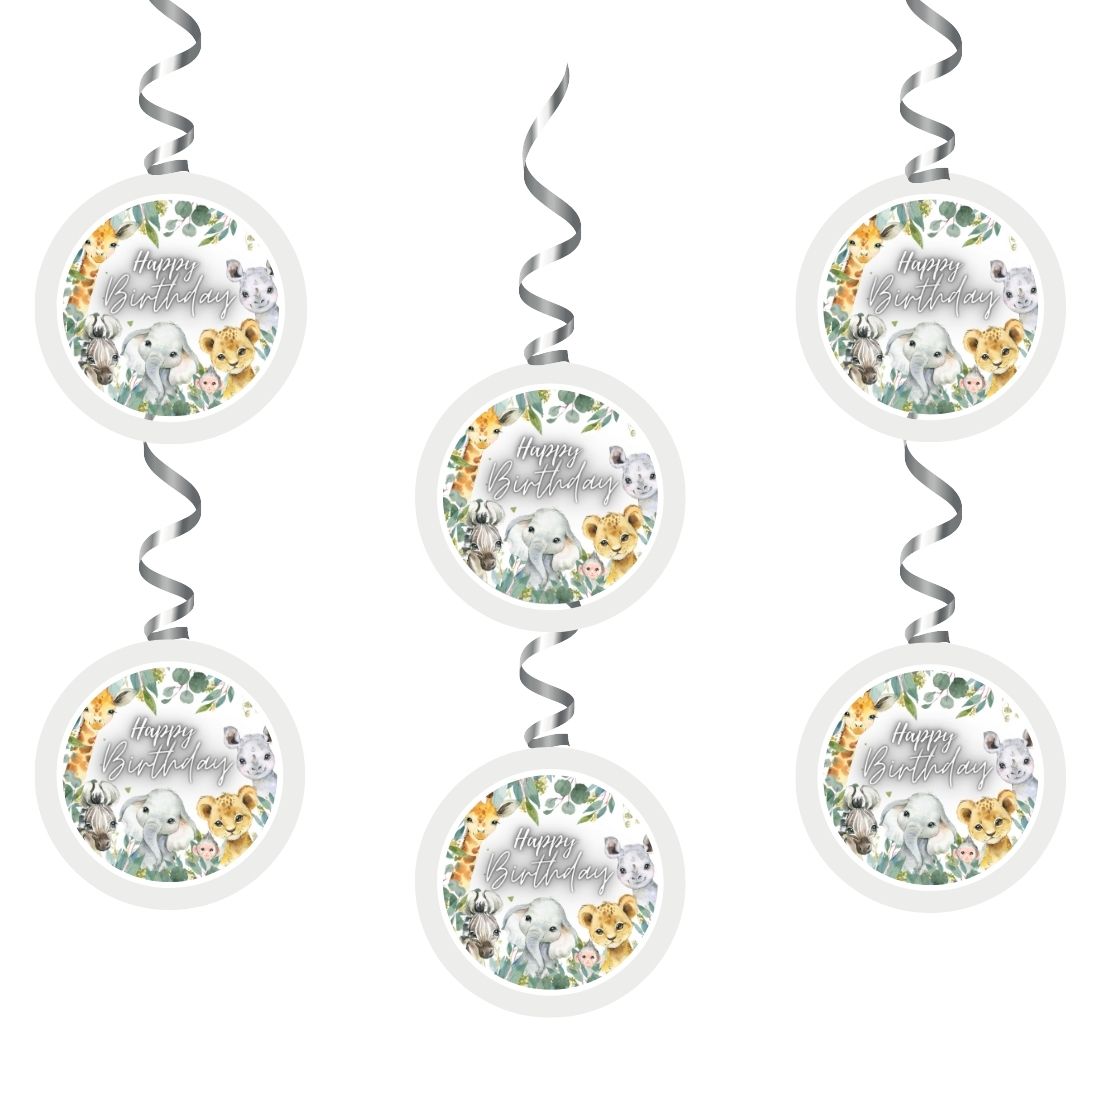 Jungle Theme Hanging Danglers - Set of 6, Double-Sided Prints, 6 Inches Each with Hanging Ribbon